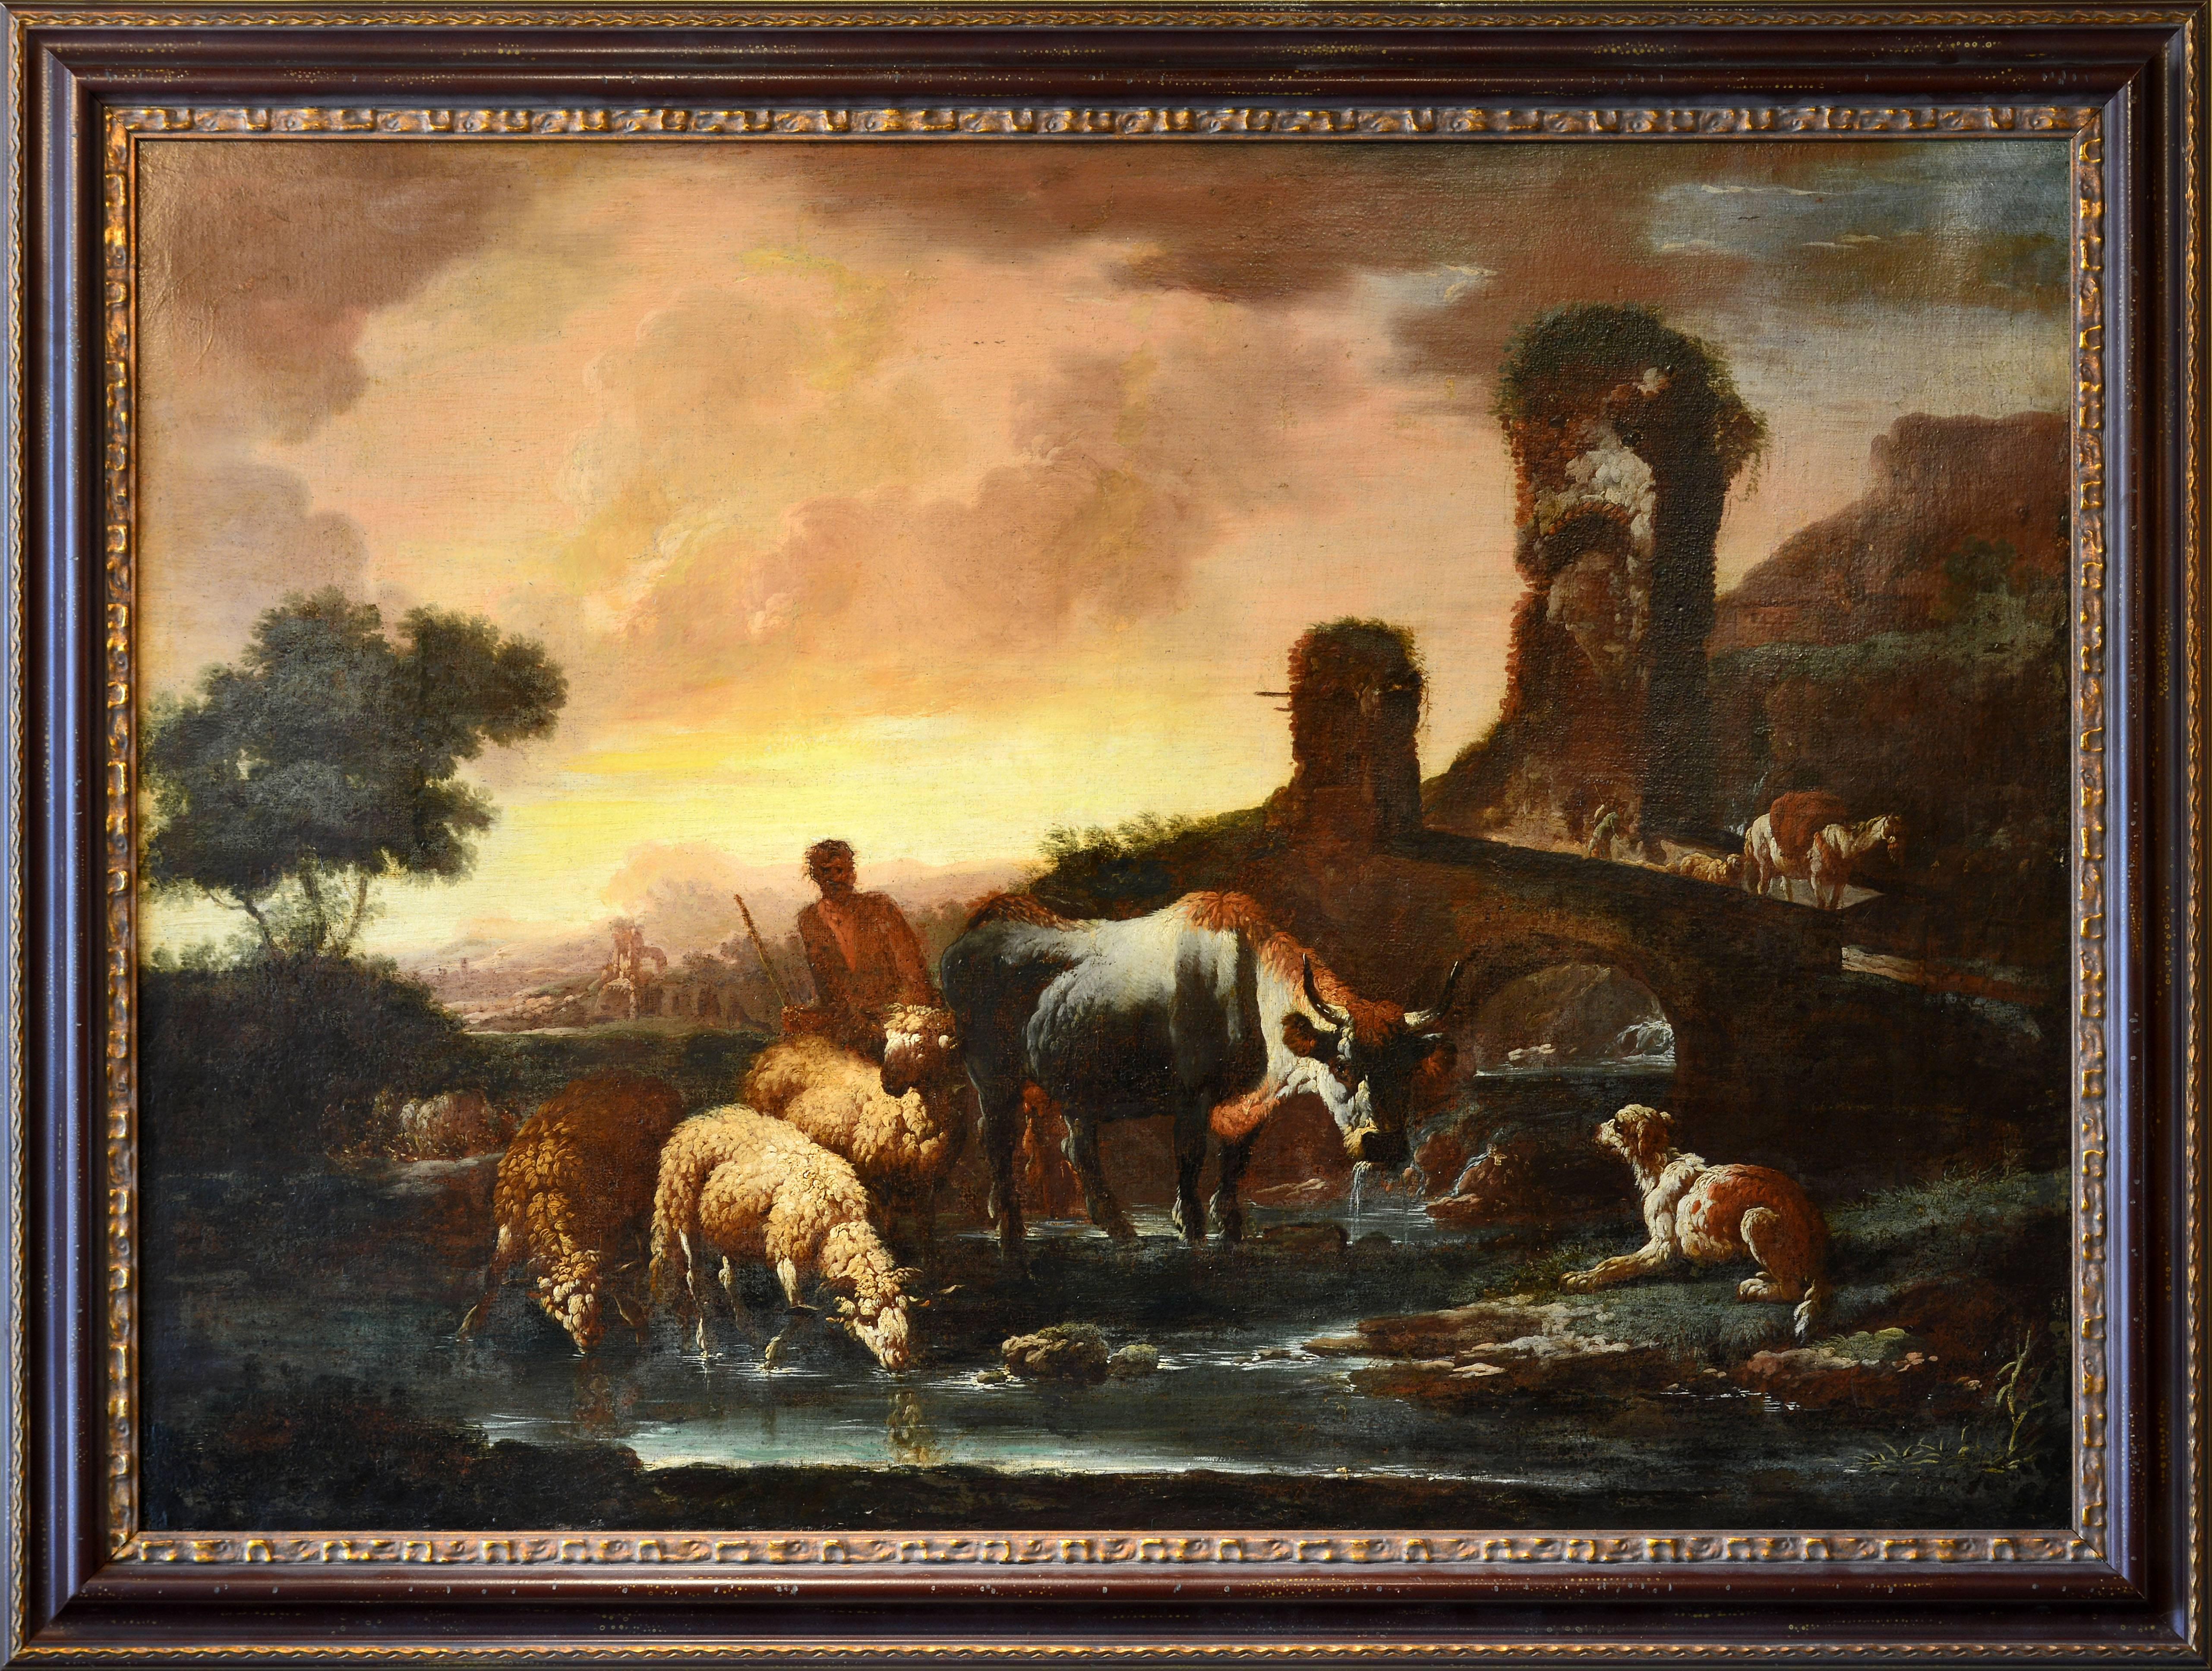 'A Shepherd and his flock in an Italianate Landscape with ruins. In the Background Peasants crossing a Bridge'
School of Phillip Peter Roos (Rosa da Tivoli), German Baroque Painter, 1651-1705.
38 x 53 in. w/o frame, 47 x 62 in. including frame,